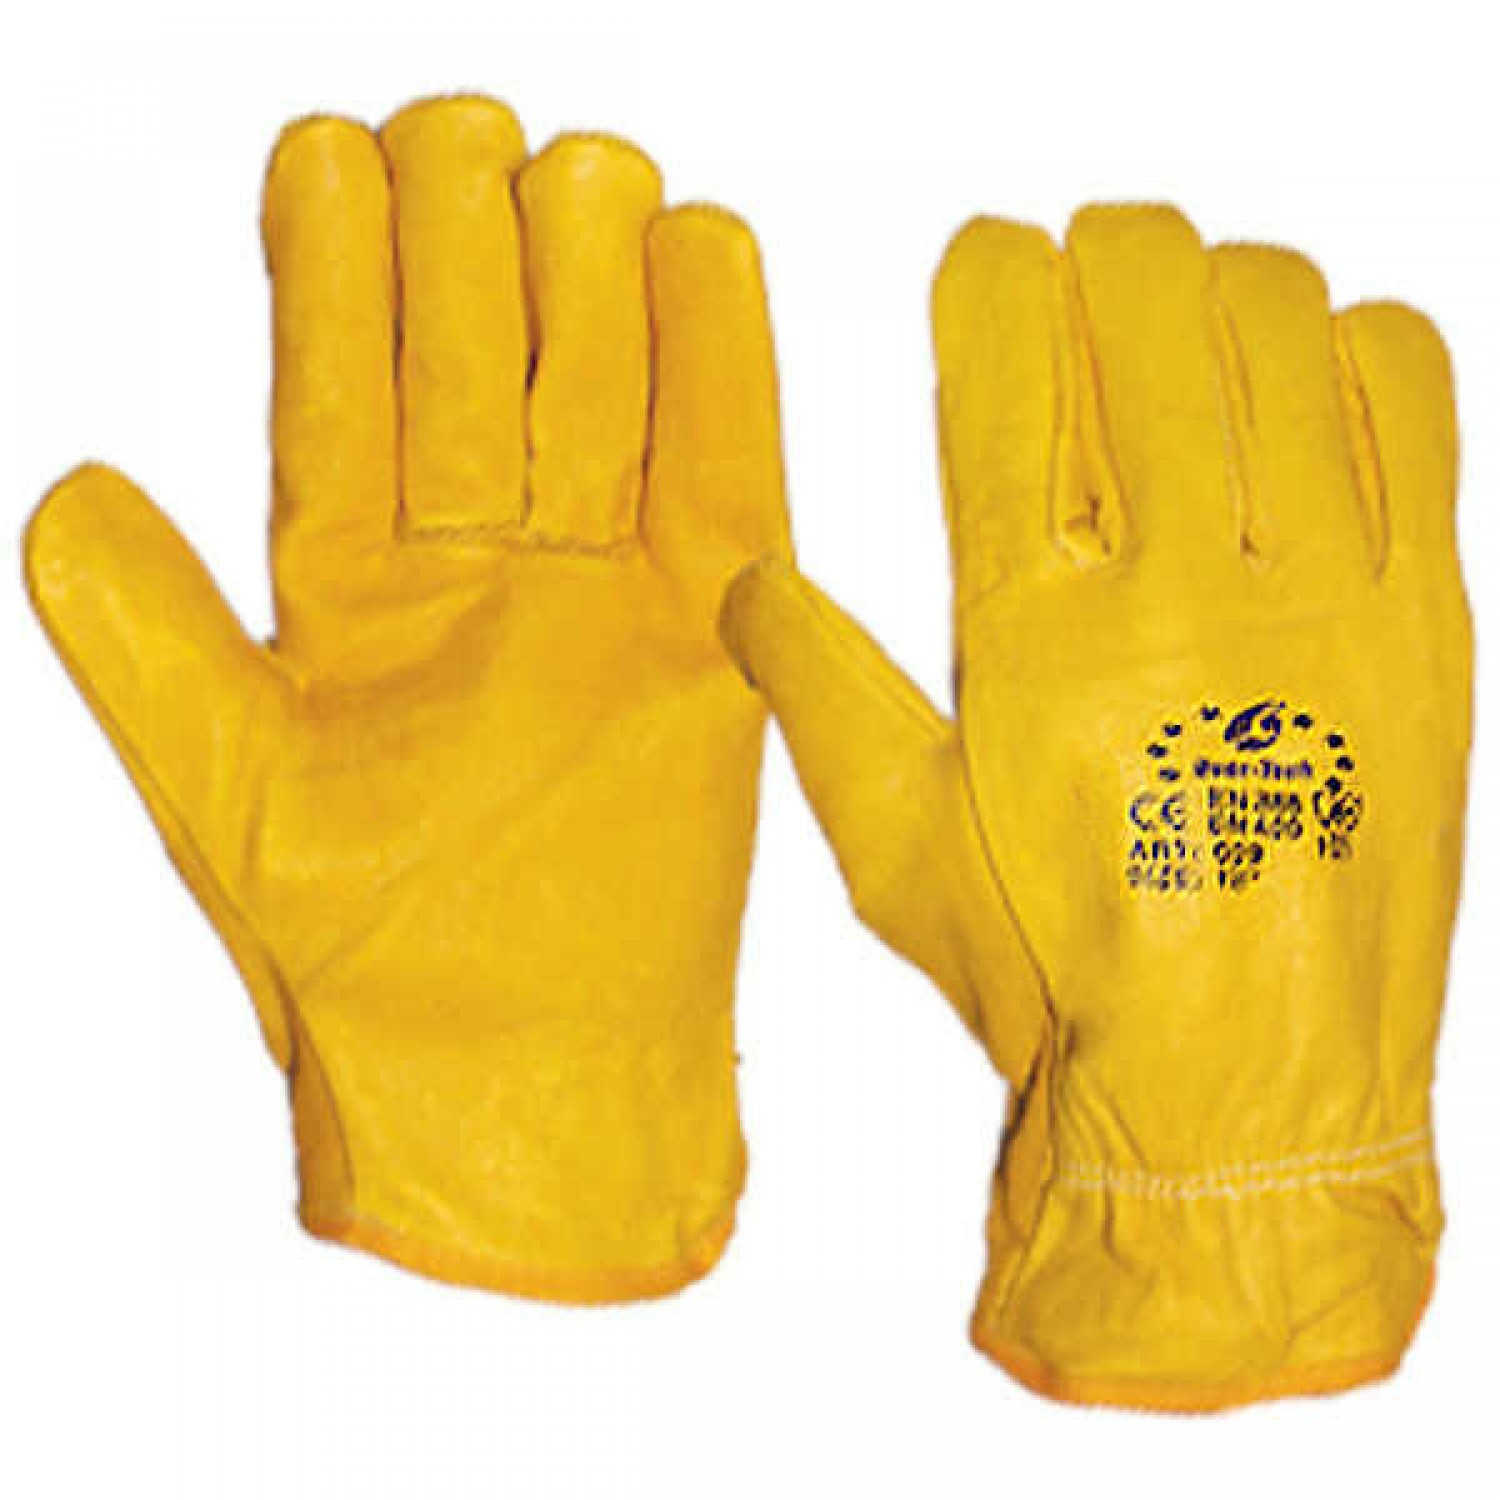 Calf Leather Yellow Work Gloves for Cold Protection